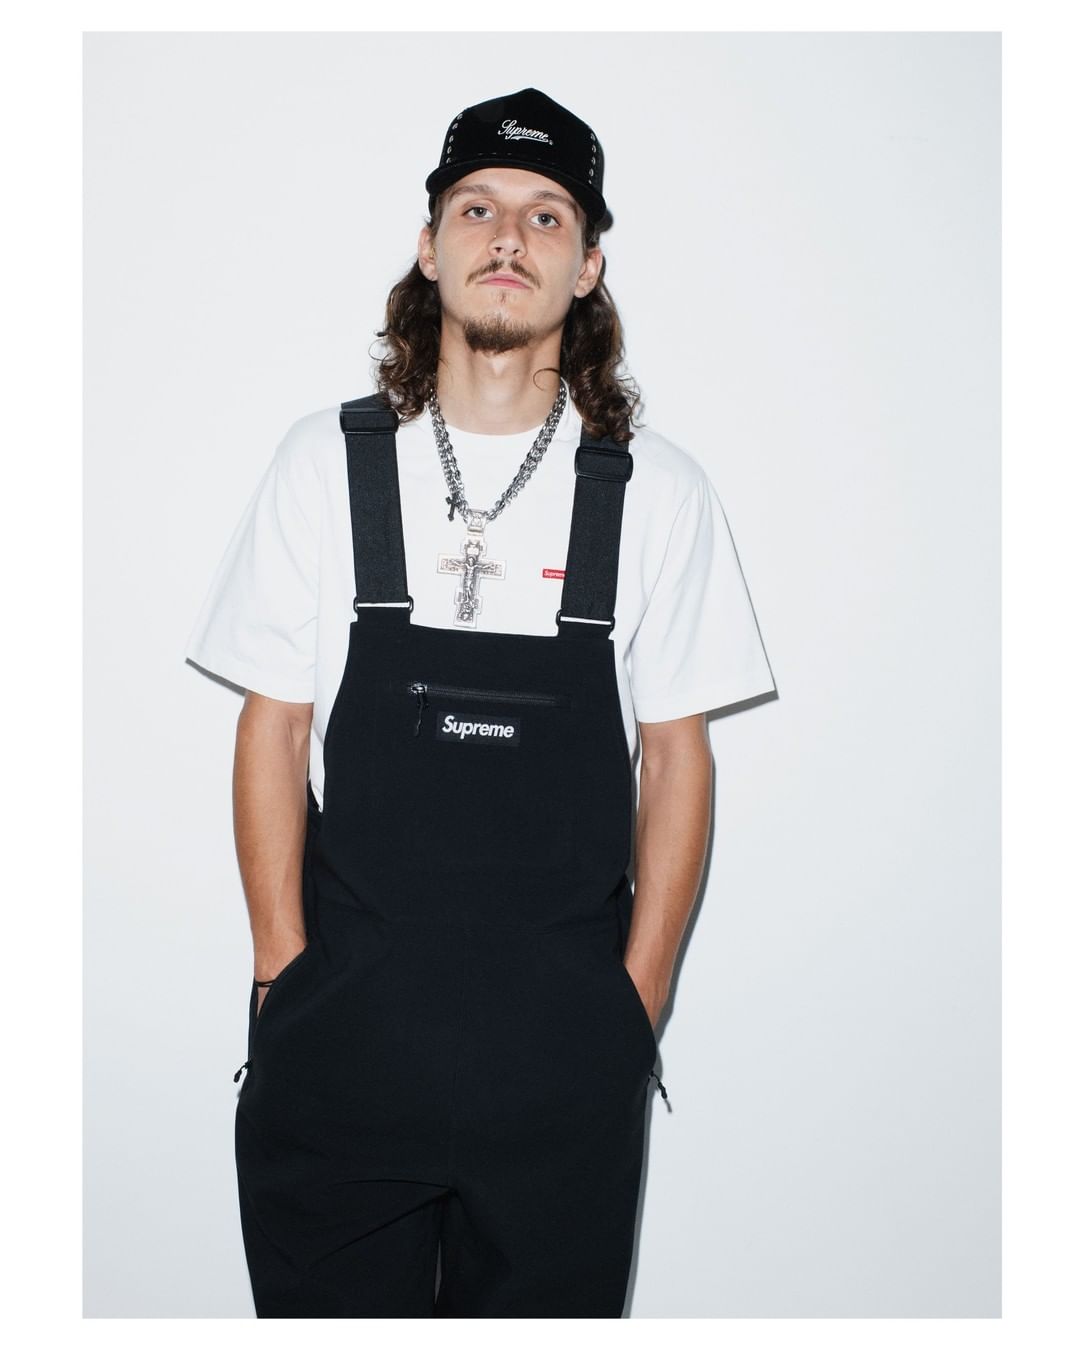 Supreme offer Closer look at AW21′ Collection in THEM Magazine 